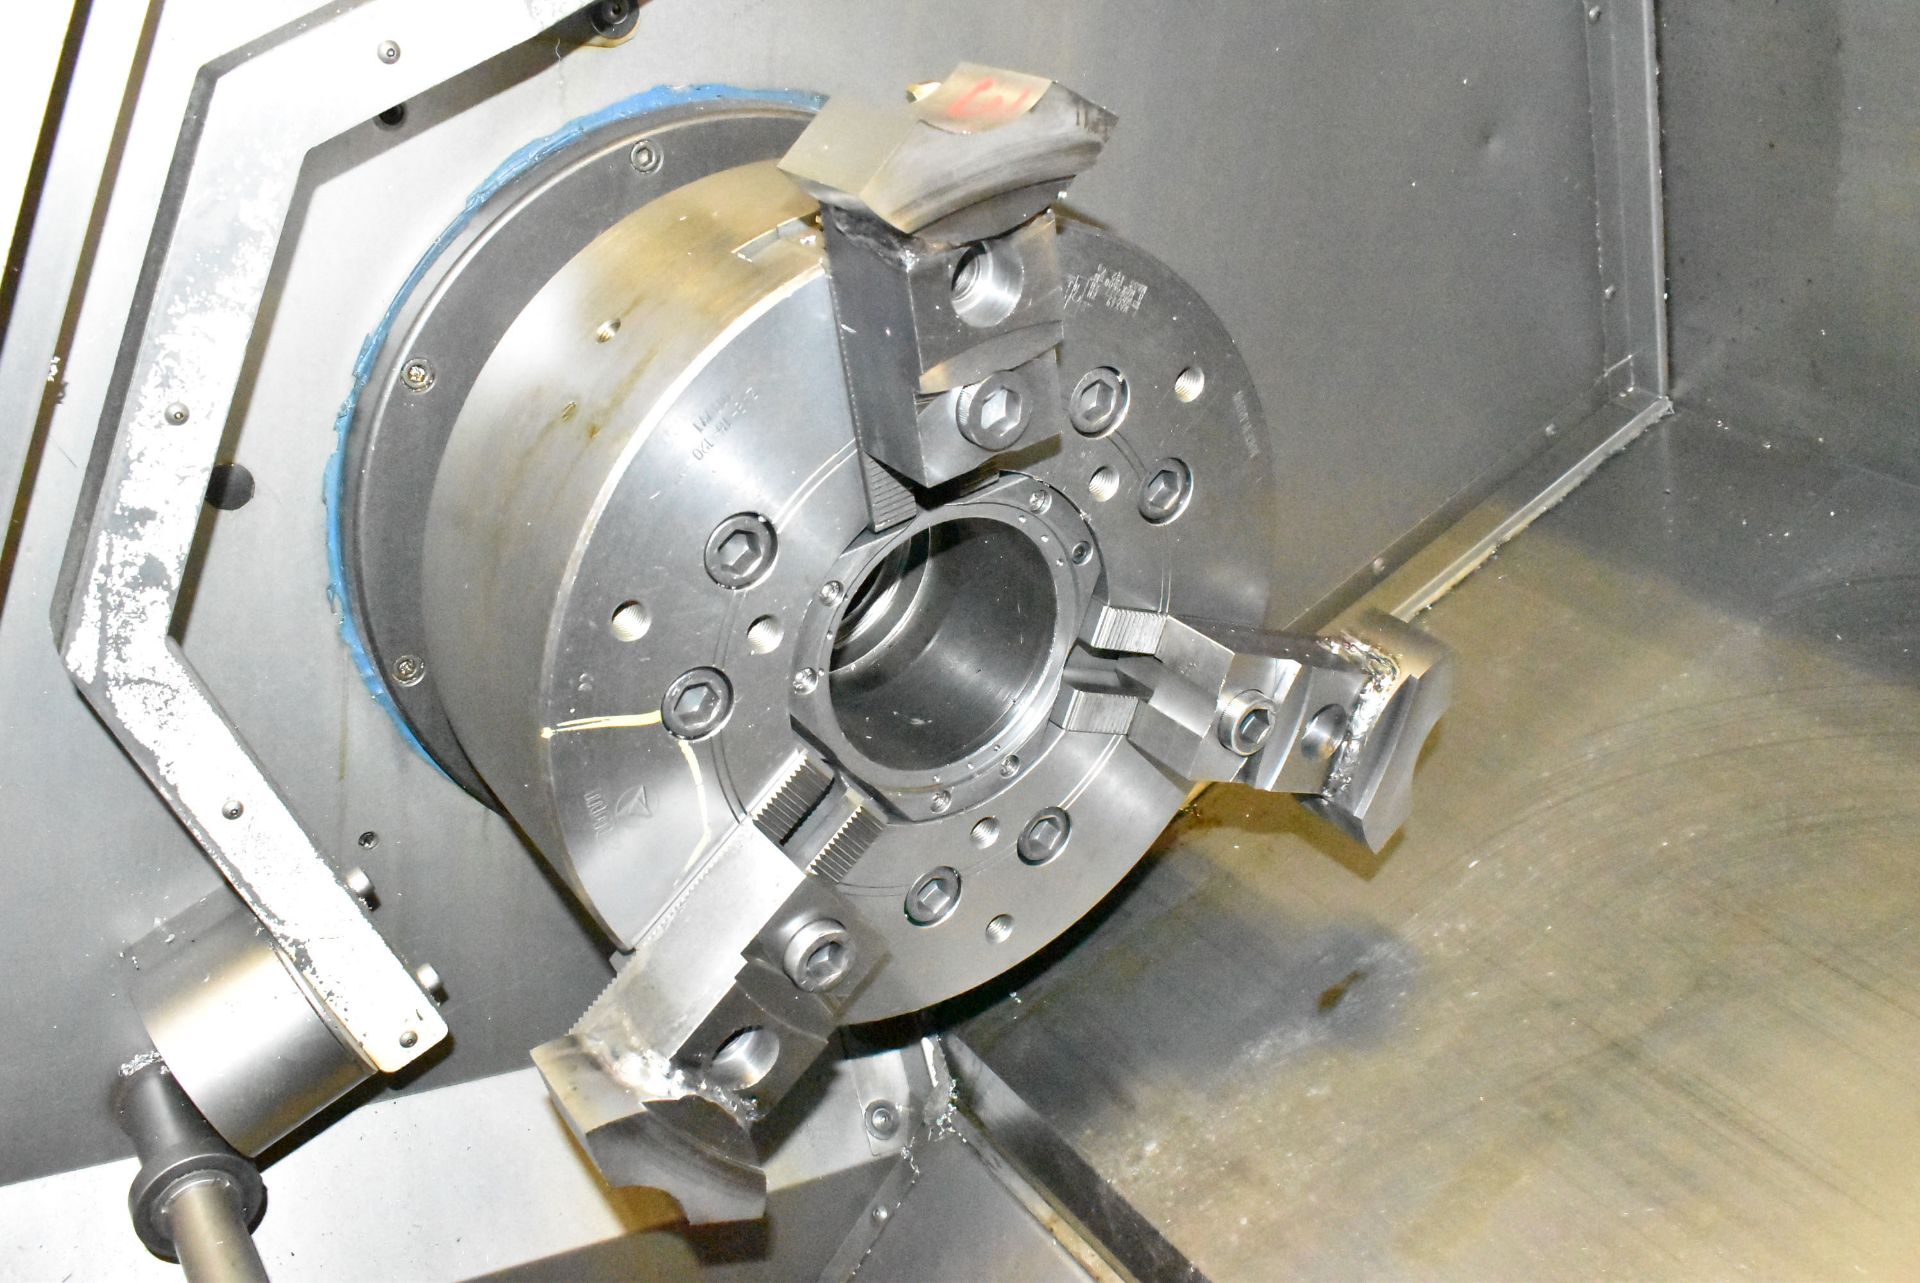 HAAS SL30TB CNC TURNING CENTER WITH HAAS CNC CONTROL, 15" 3-JAW HYDRAULIC CHUCK, 4" SPINDLE BORE, - Image 5 of 8